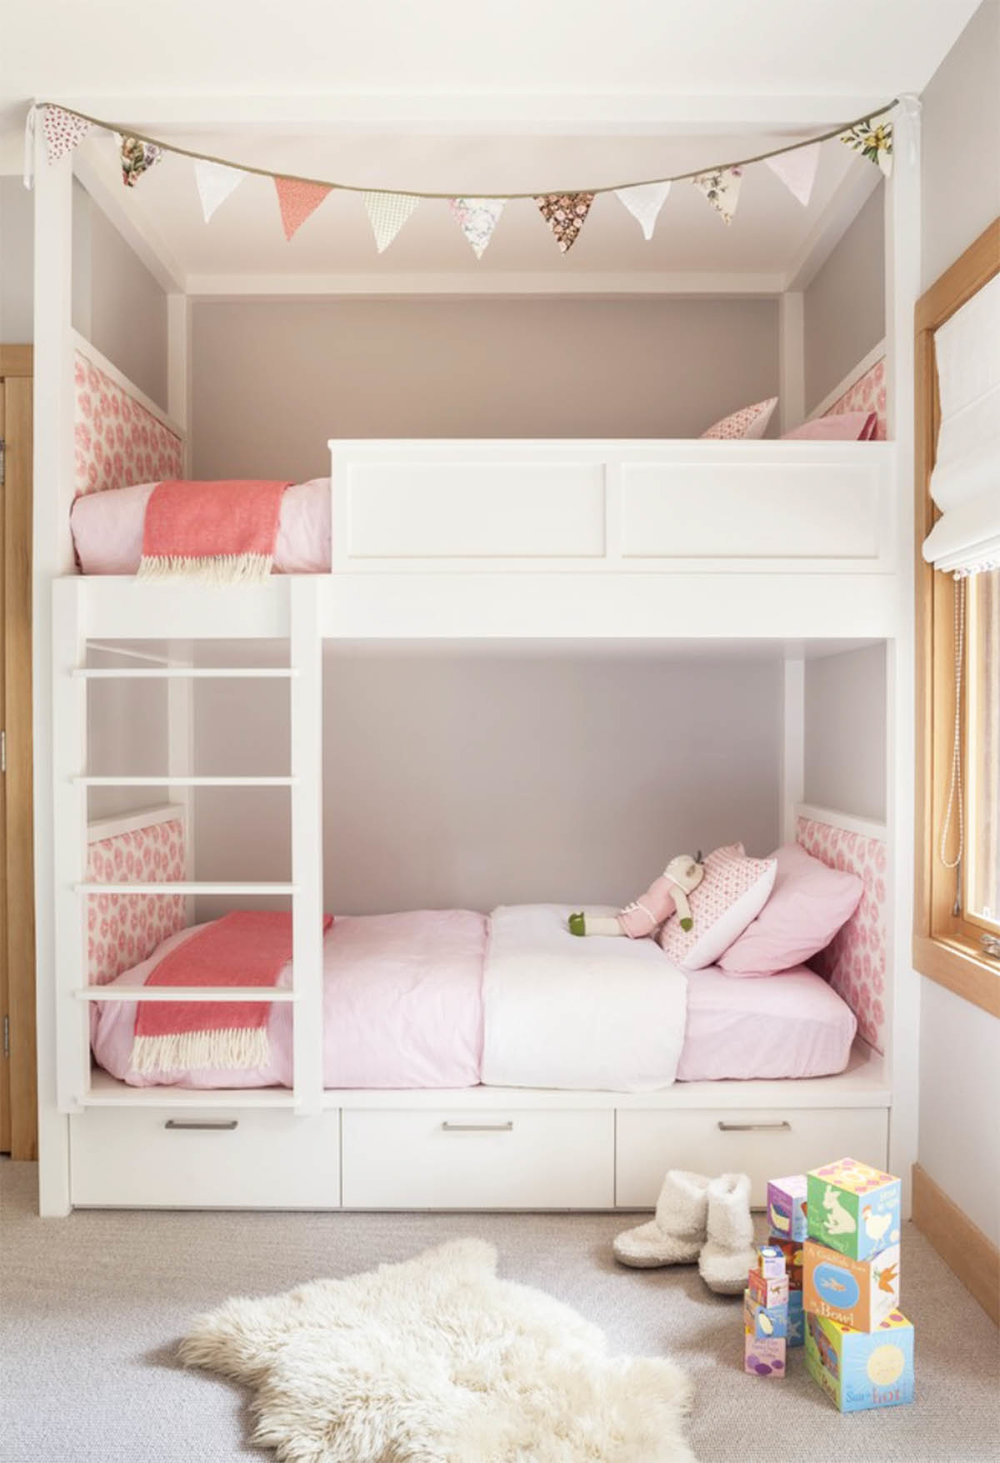 Shared Kids Rooms With Bunk Beds, Bunk Beds For Kids Girls